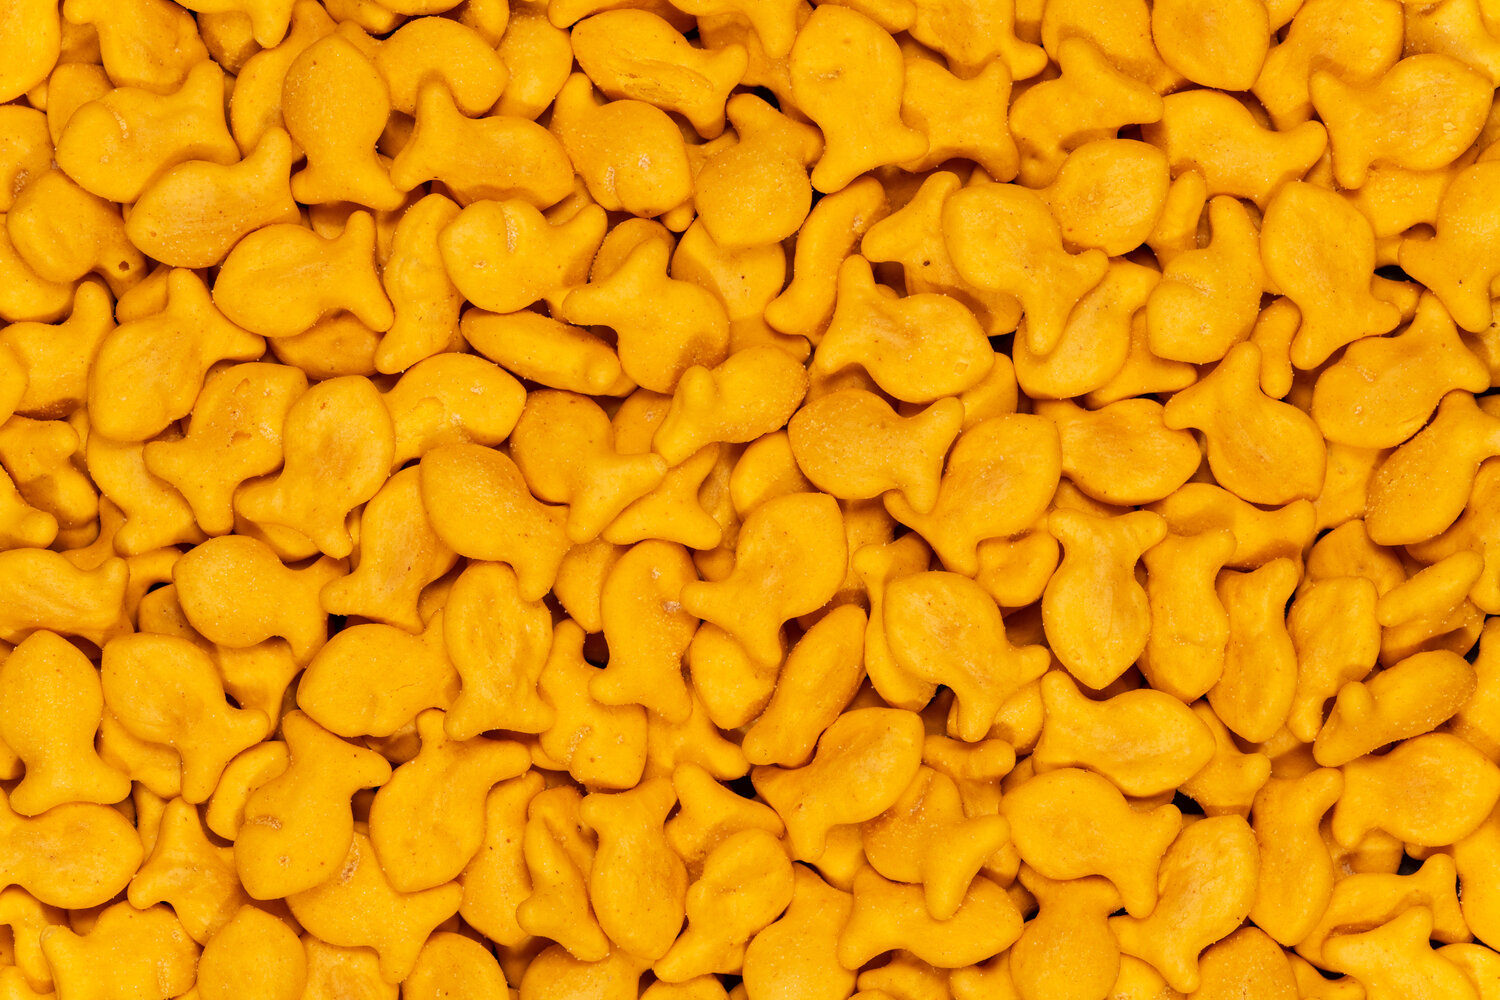 Are Goldfish Crackers Really a Healthier Choice for Kids?